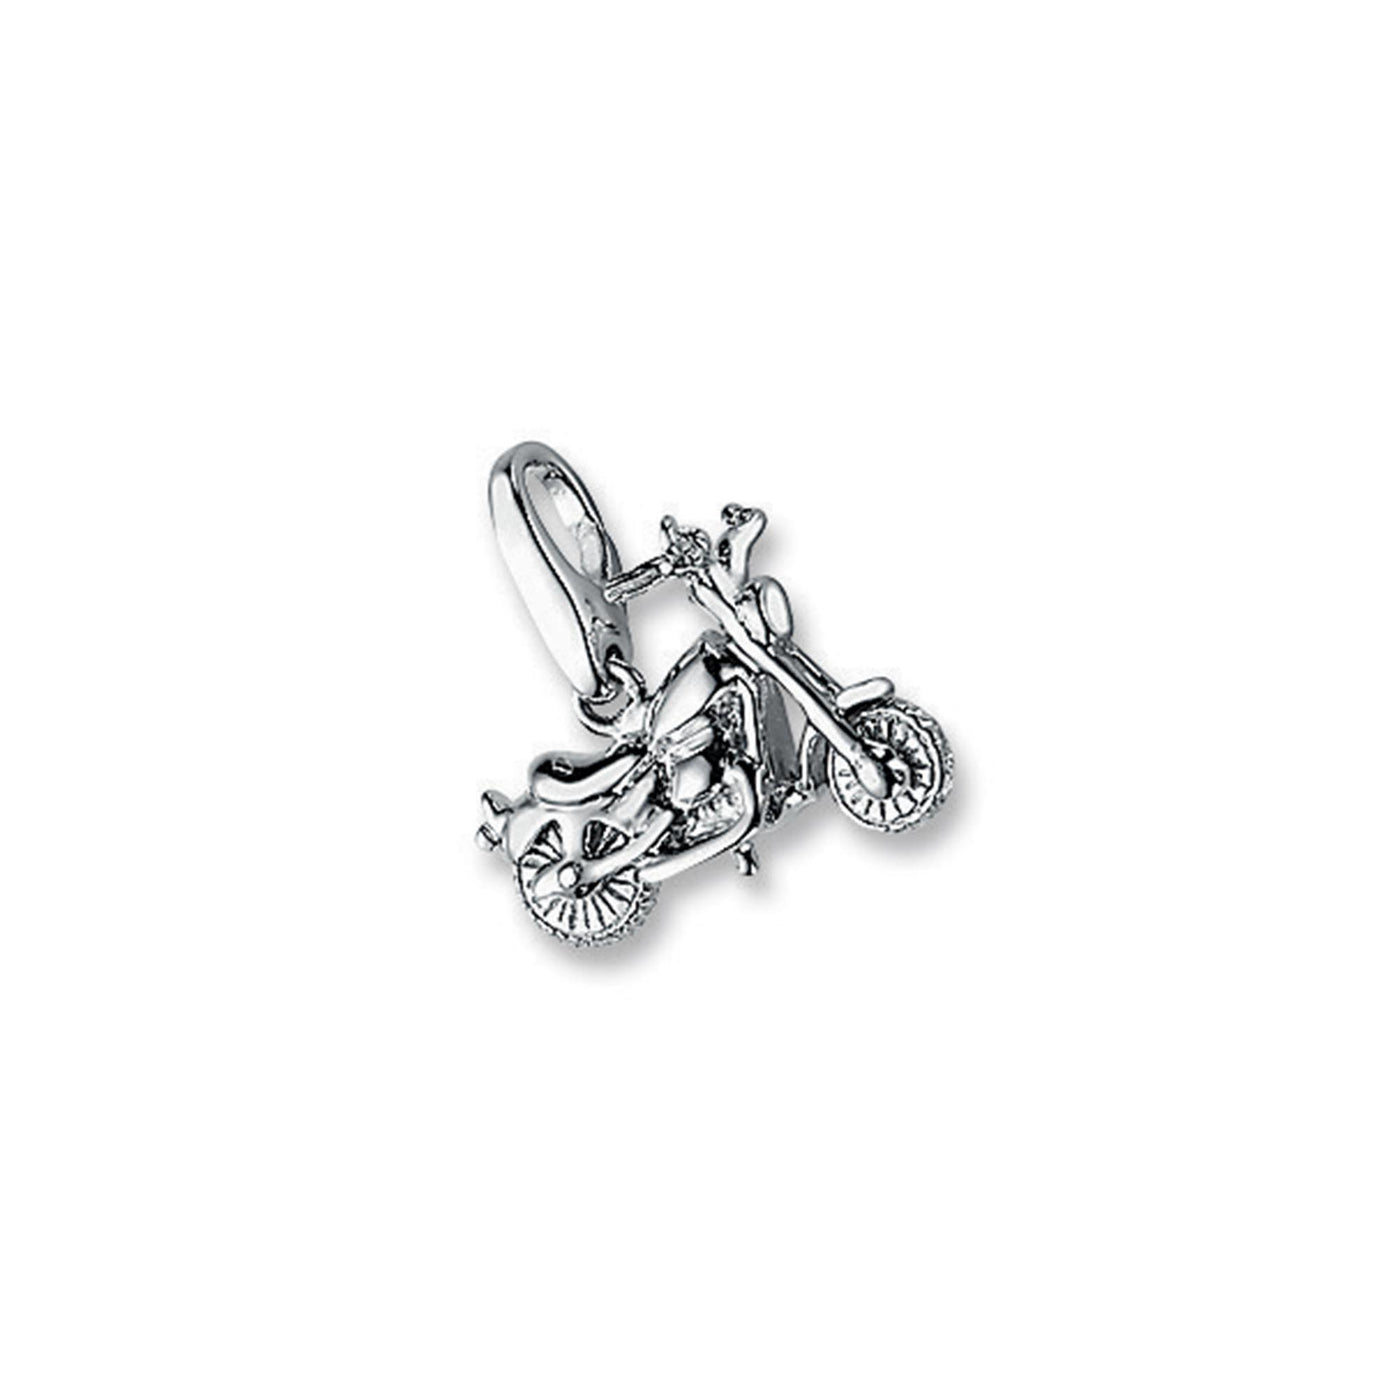 Rebecca Sloane Sterling Silver Motorcycle Charm